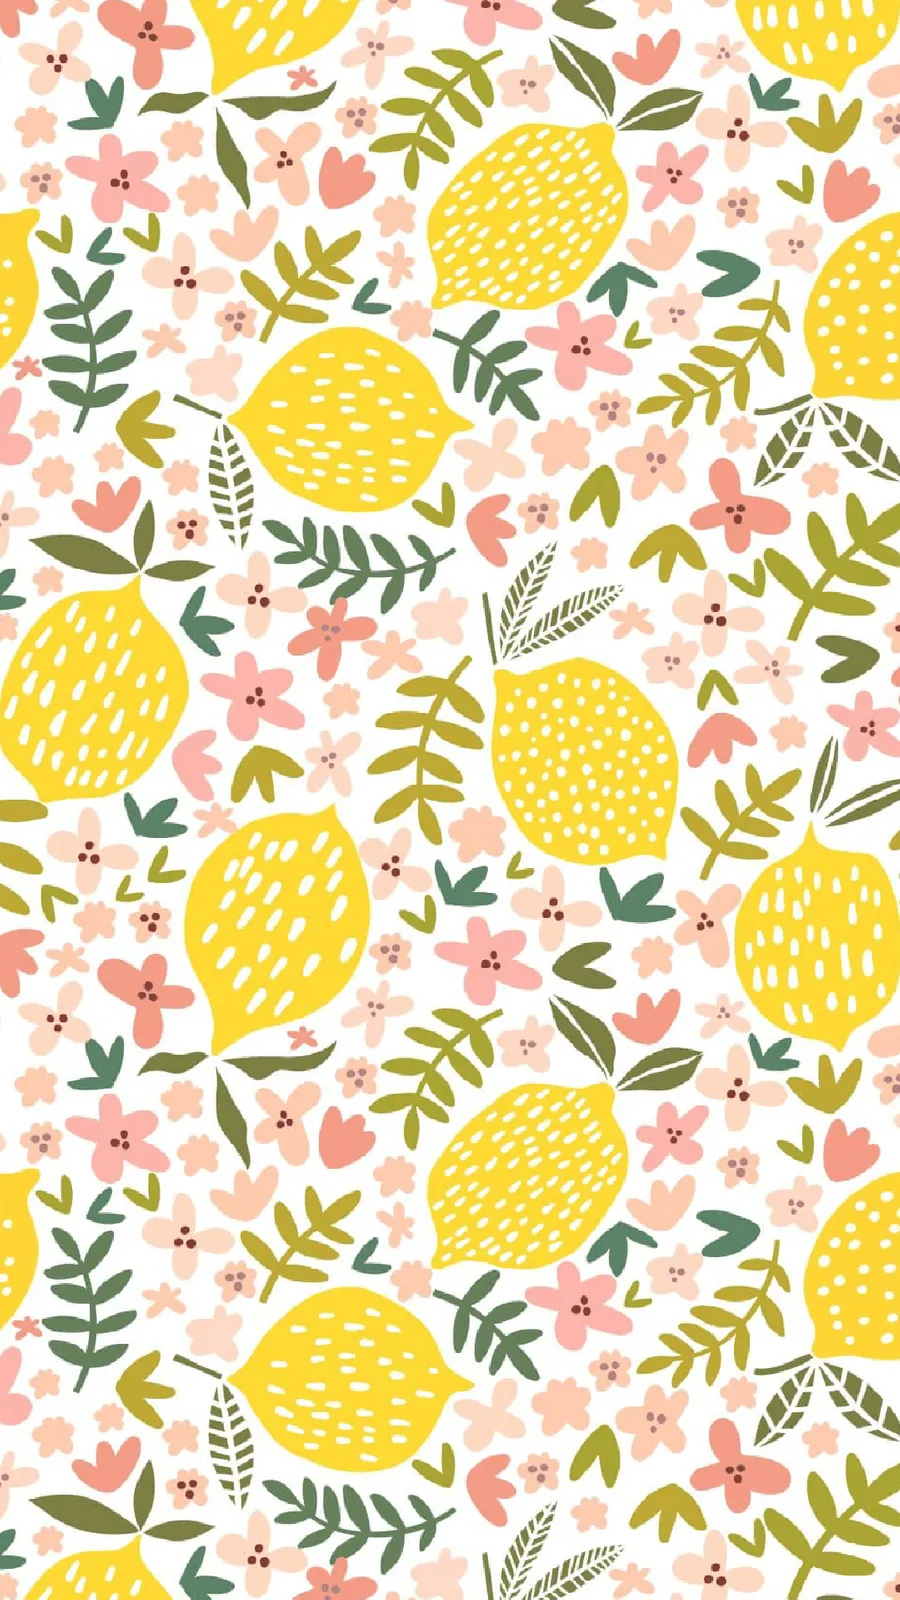 Lemon background for mobile zoom-backgrounds template